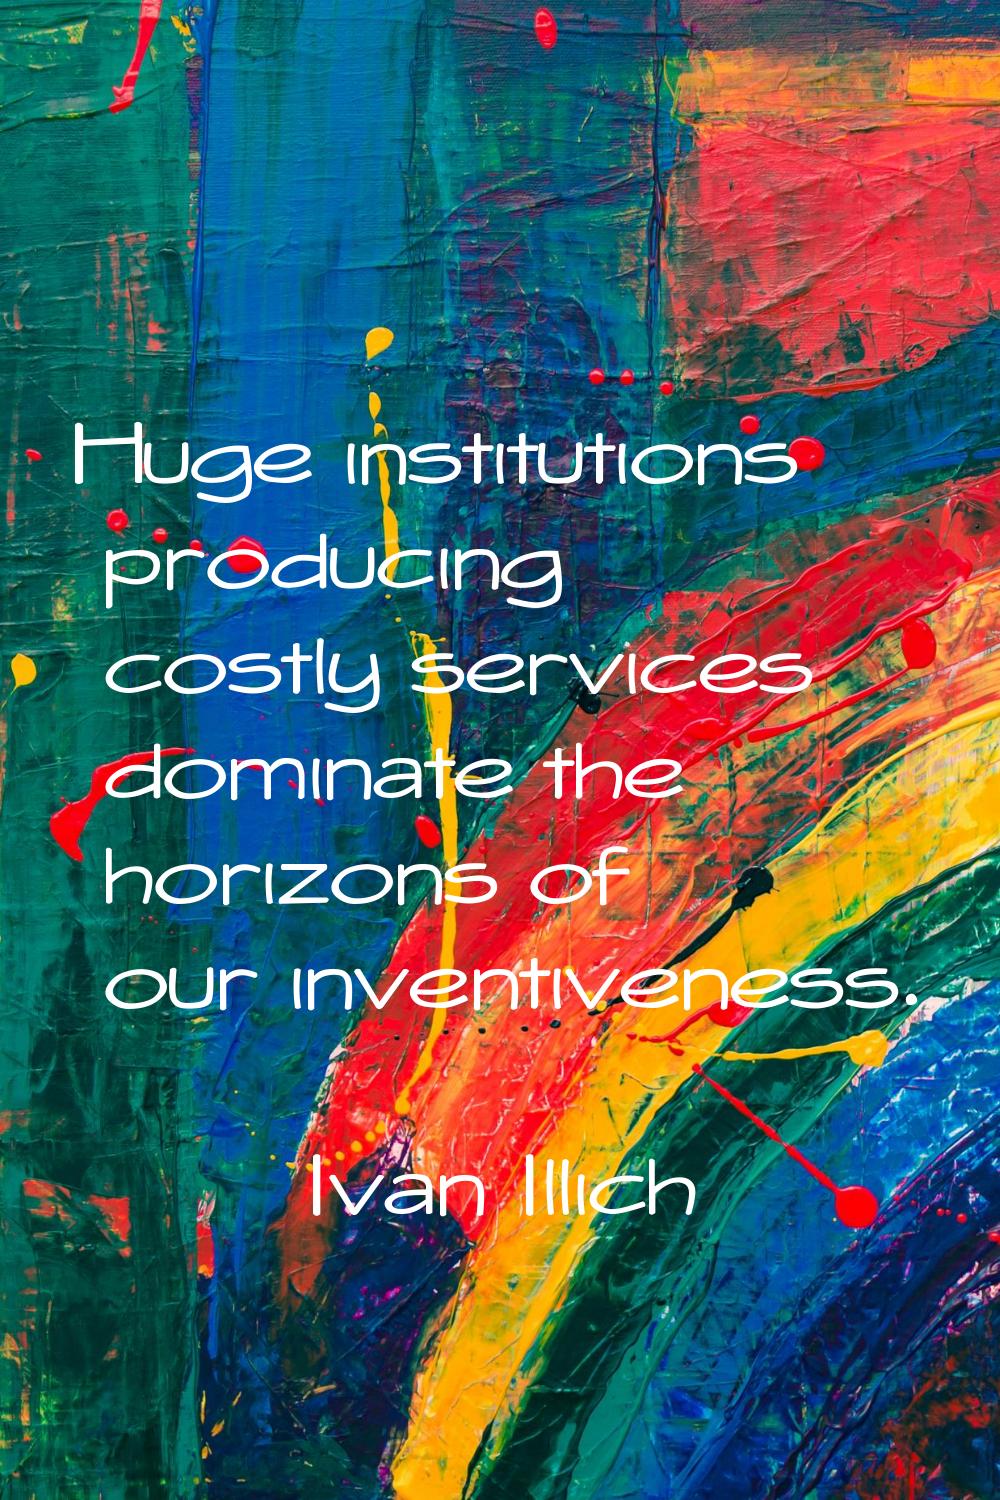 Huge institutions producing costly services dominate the horizons of our inventiveness.